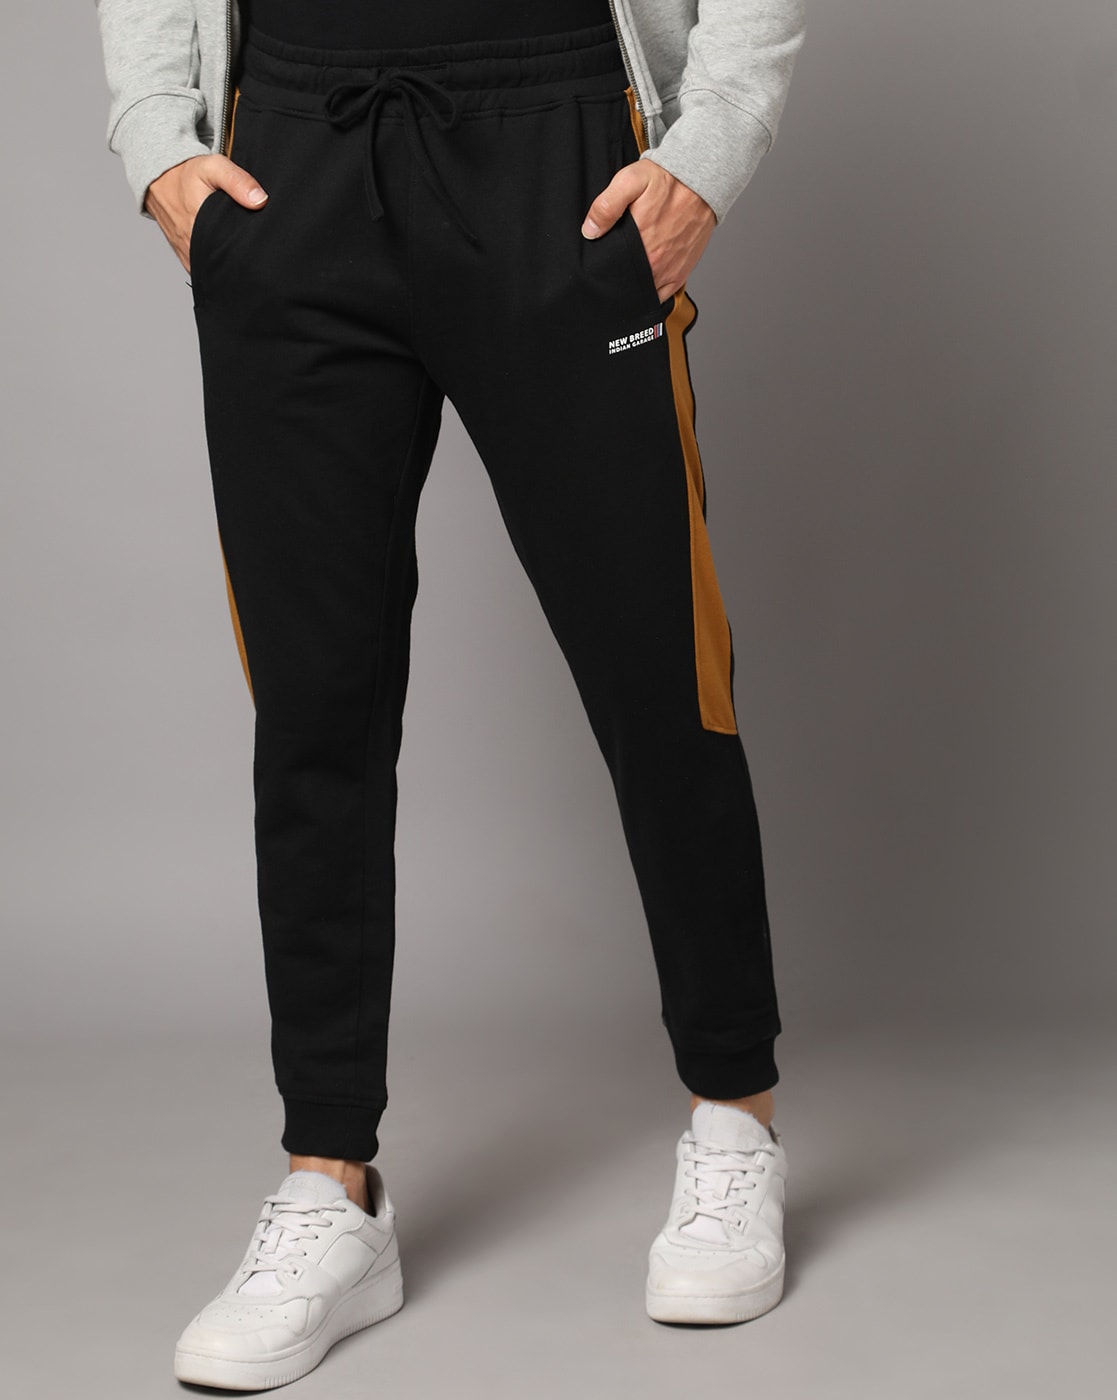 Men's Cycling Track Pants | Showers Pass